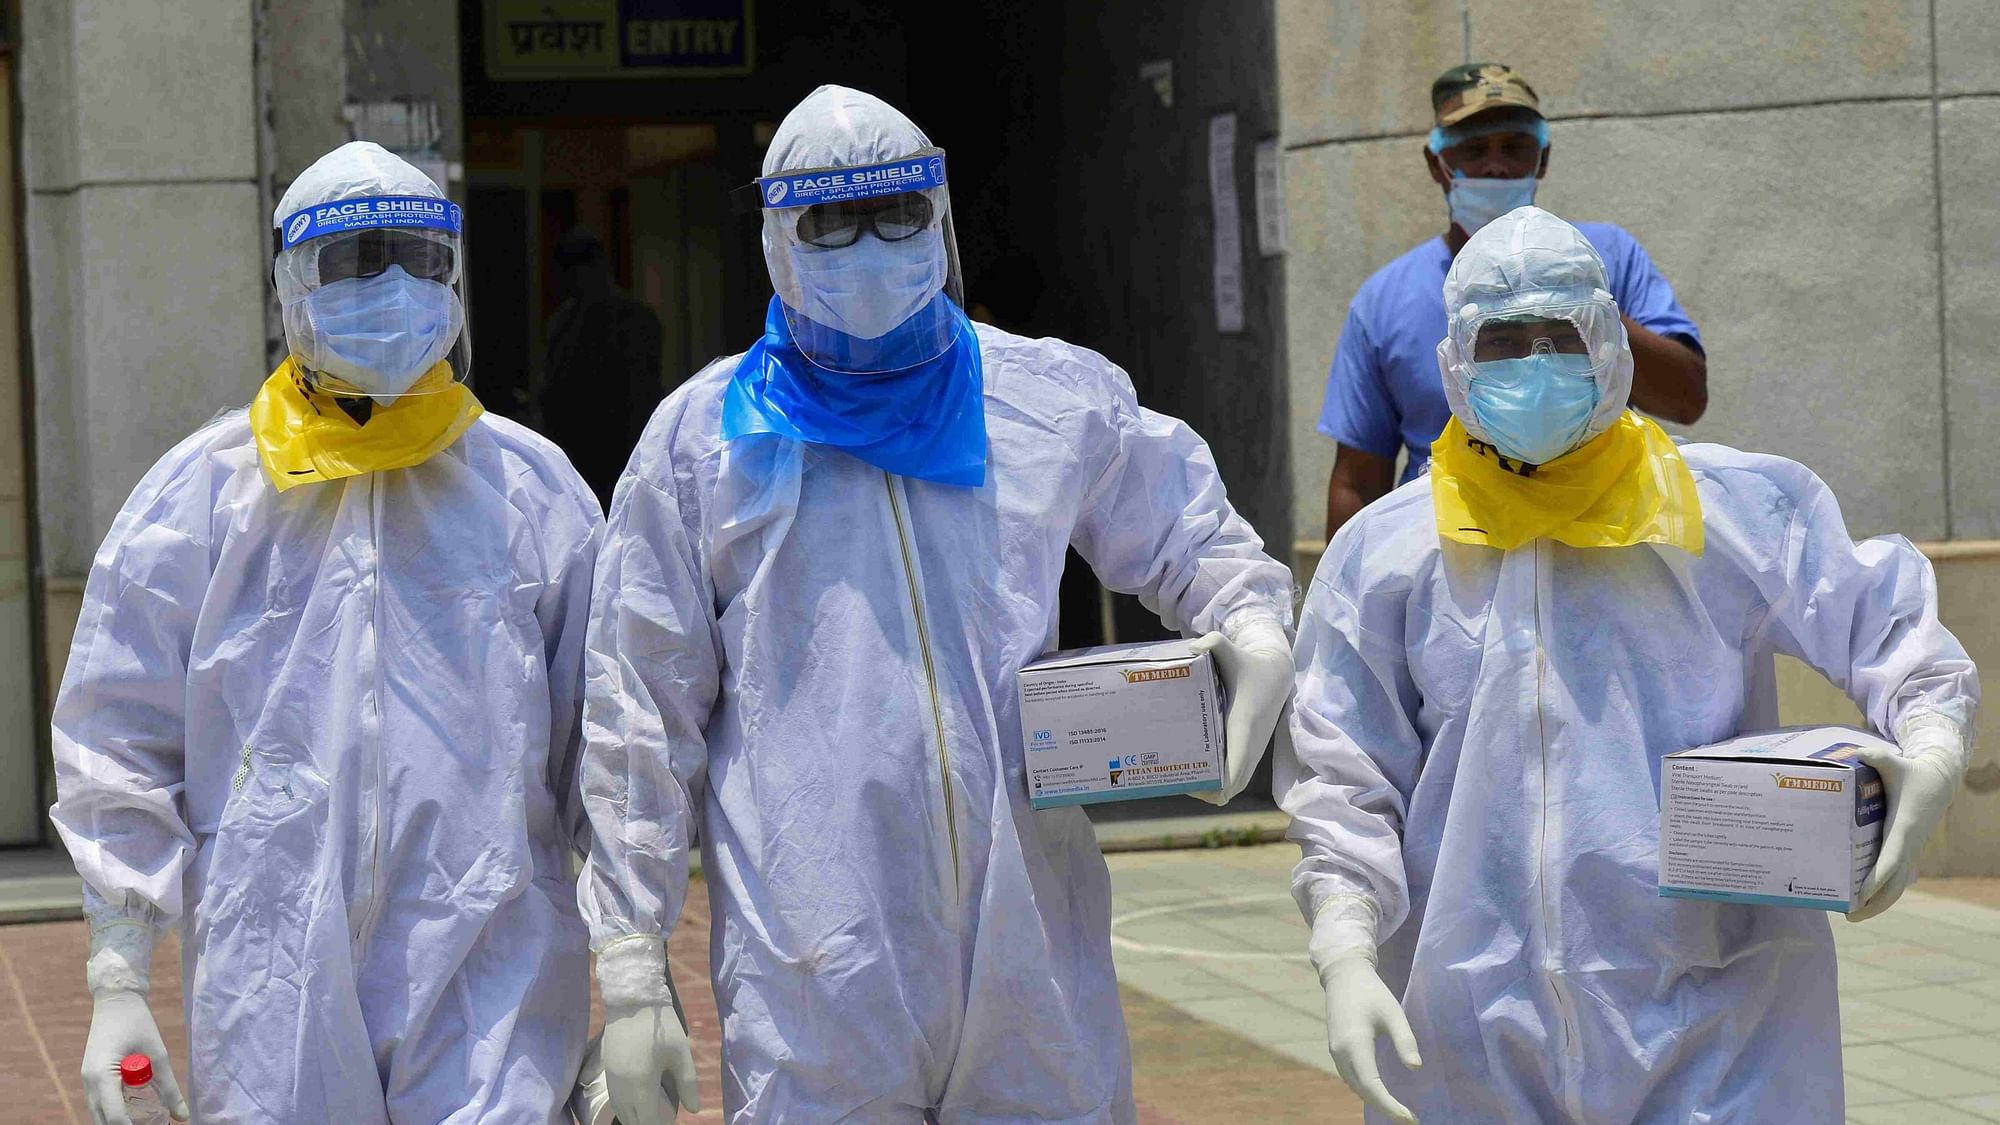 Medics arrive to take samples of suspected COVID-19 patients for lab tests at a government hospital in New Delhi.&nbsp; Image used for representation purpose.